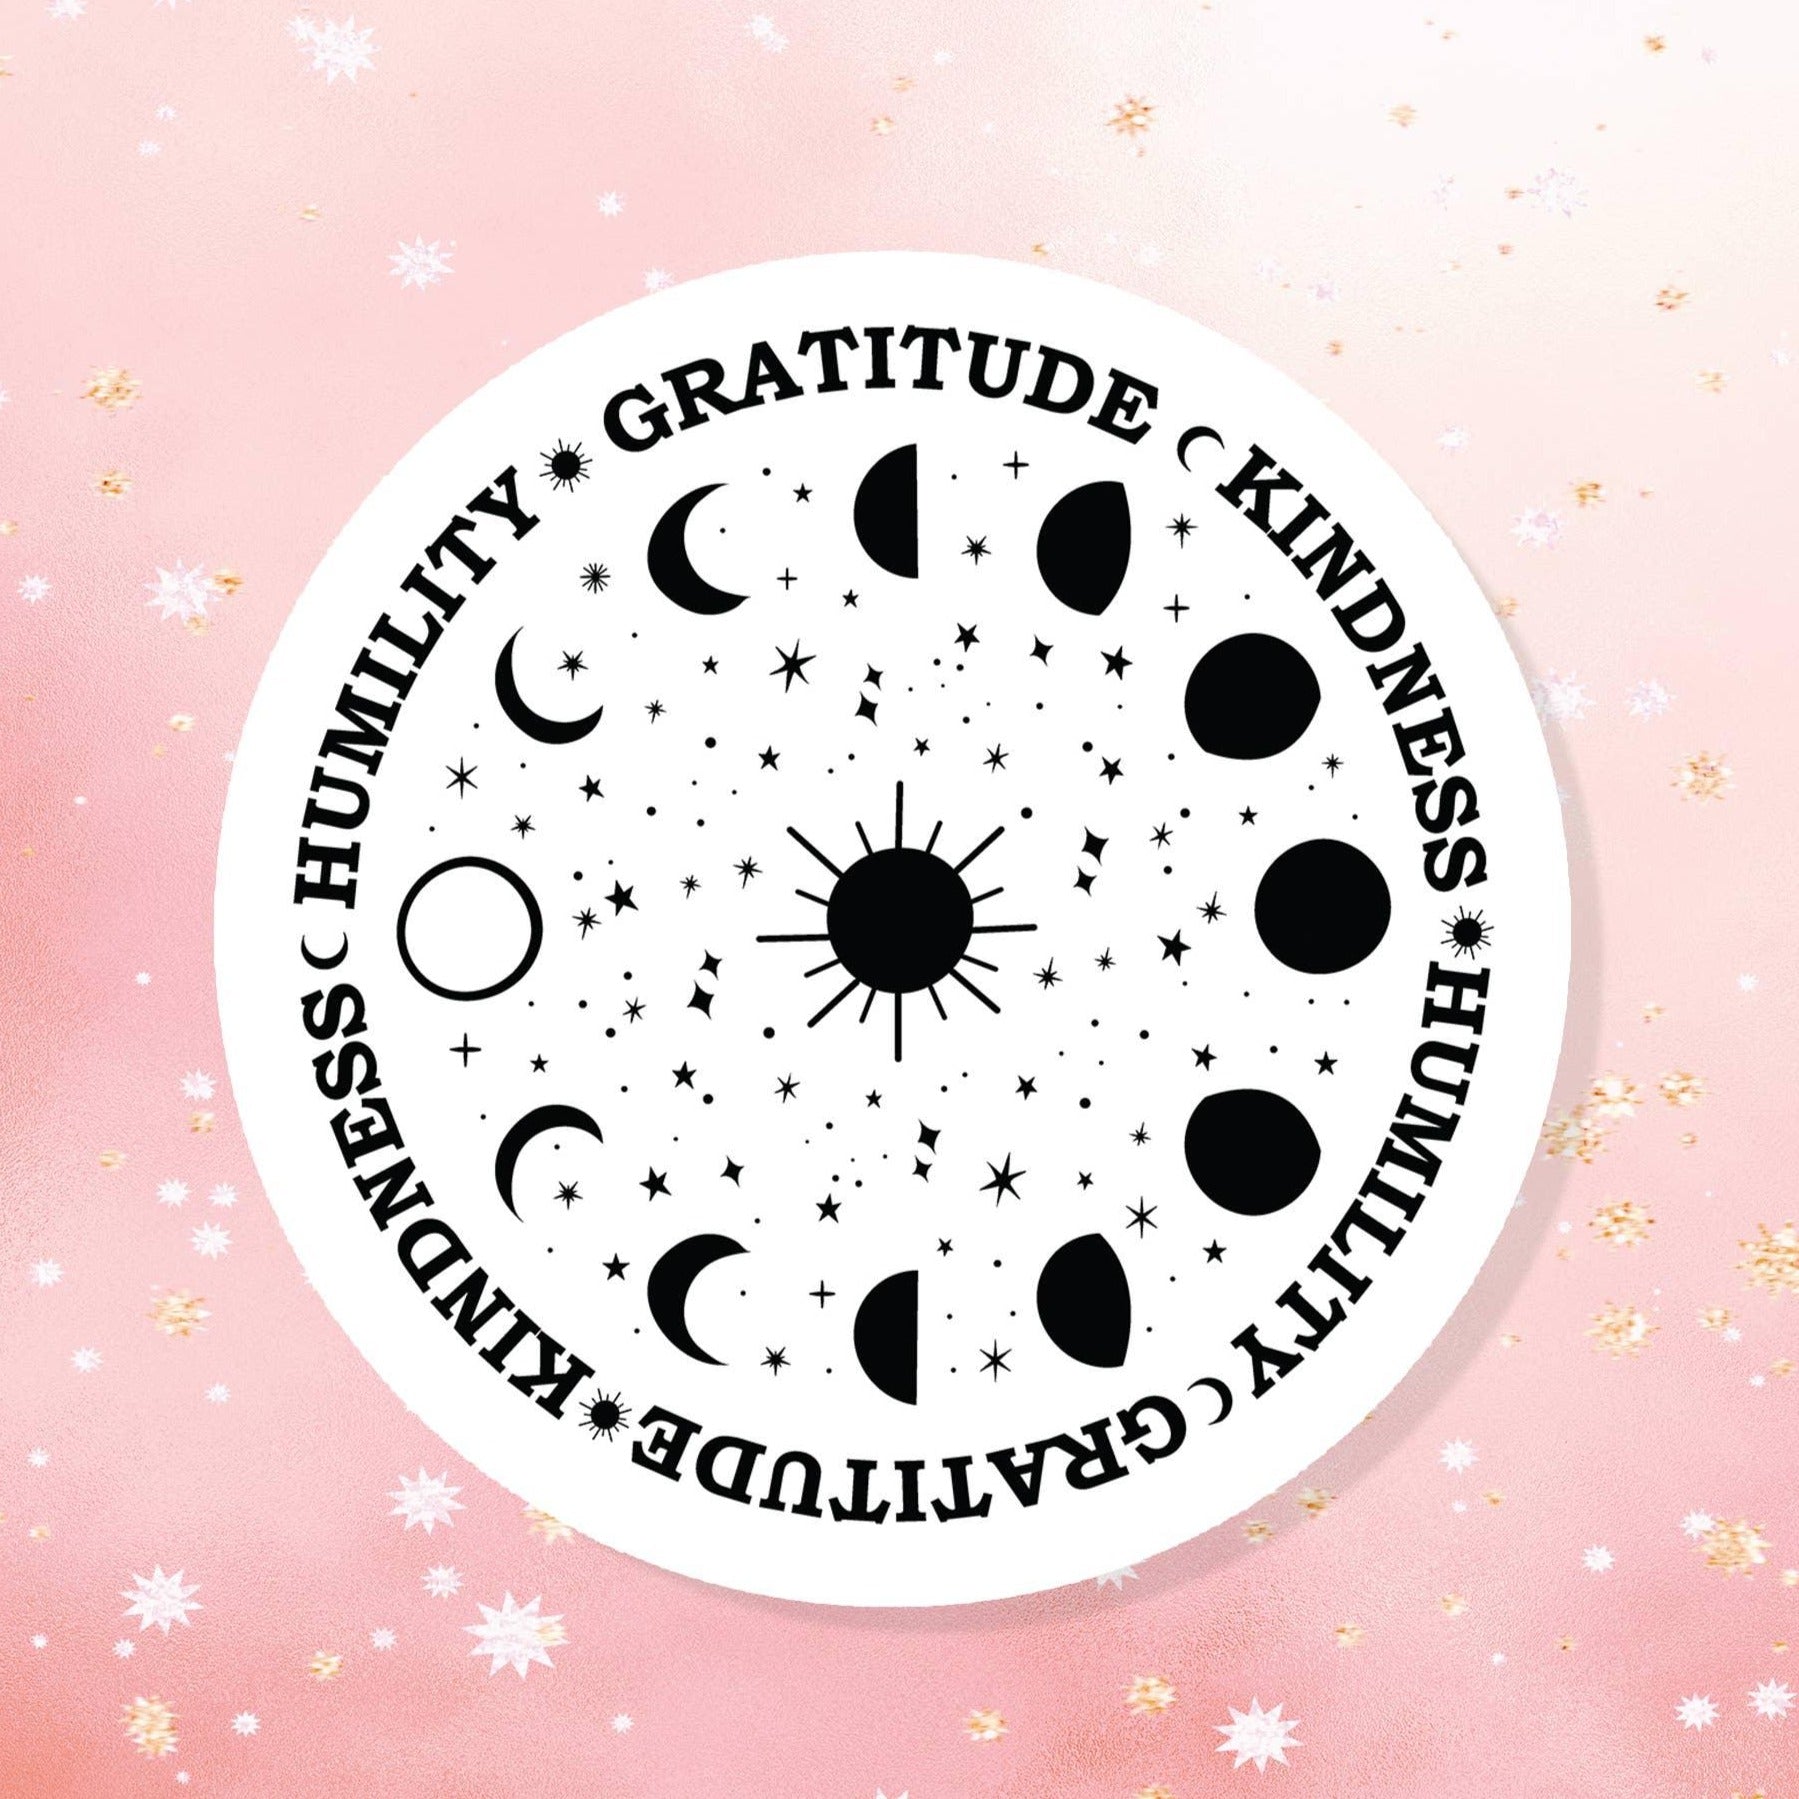 Humanity Gratitude Kindness Sticker - Classic Variable